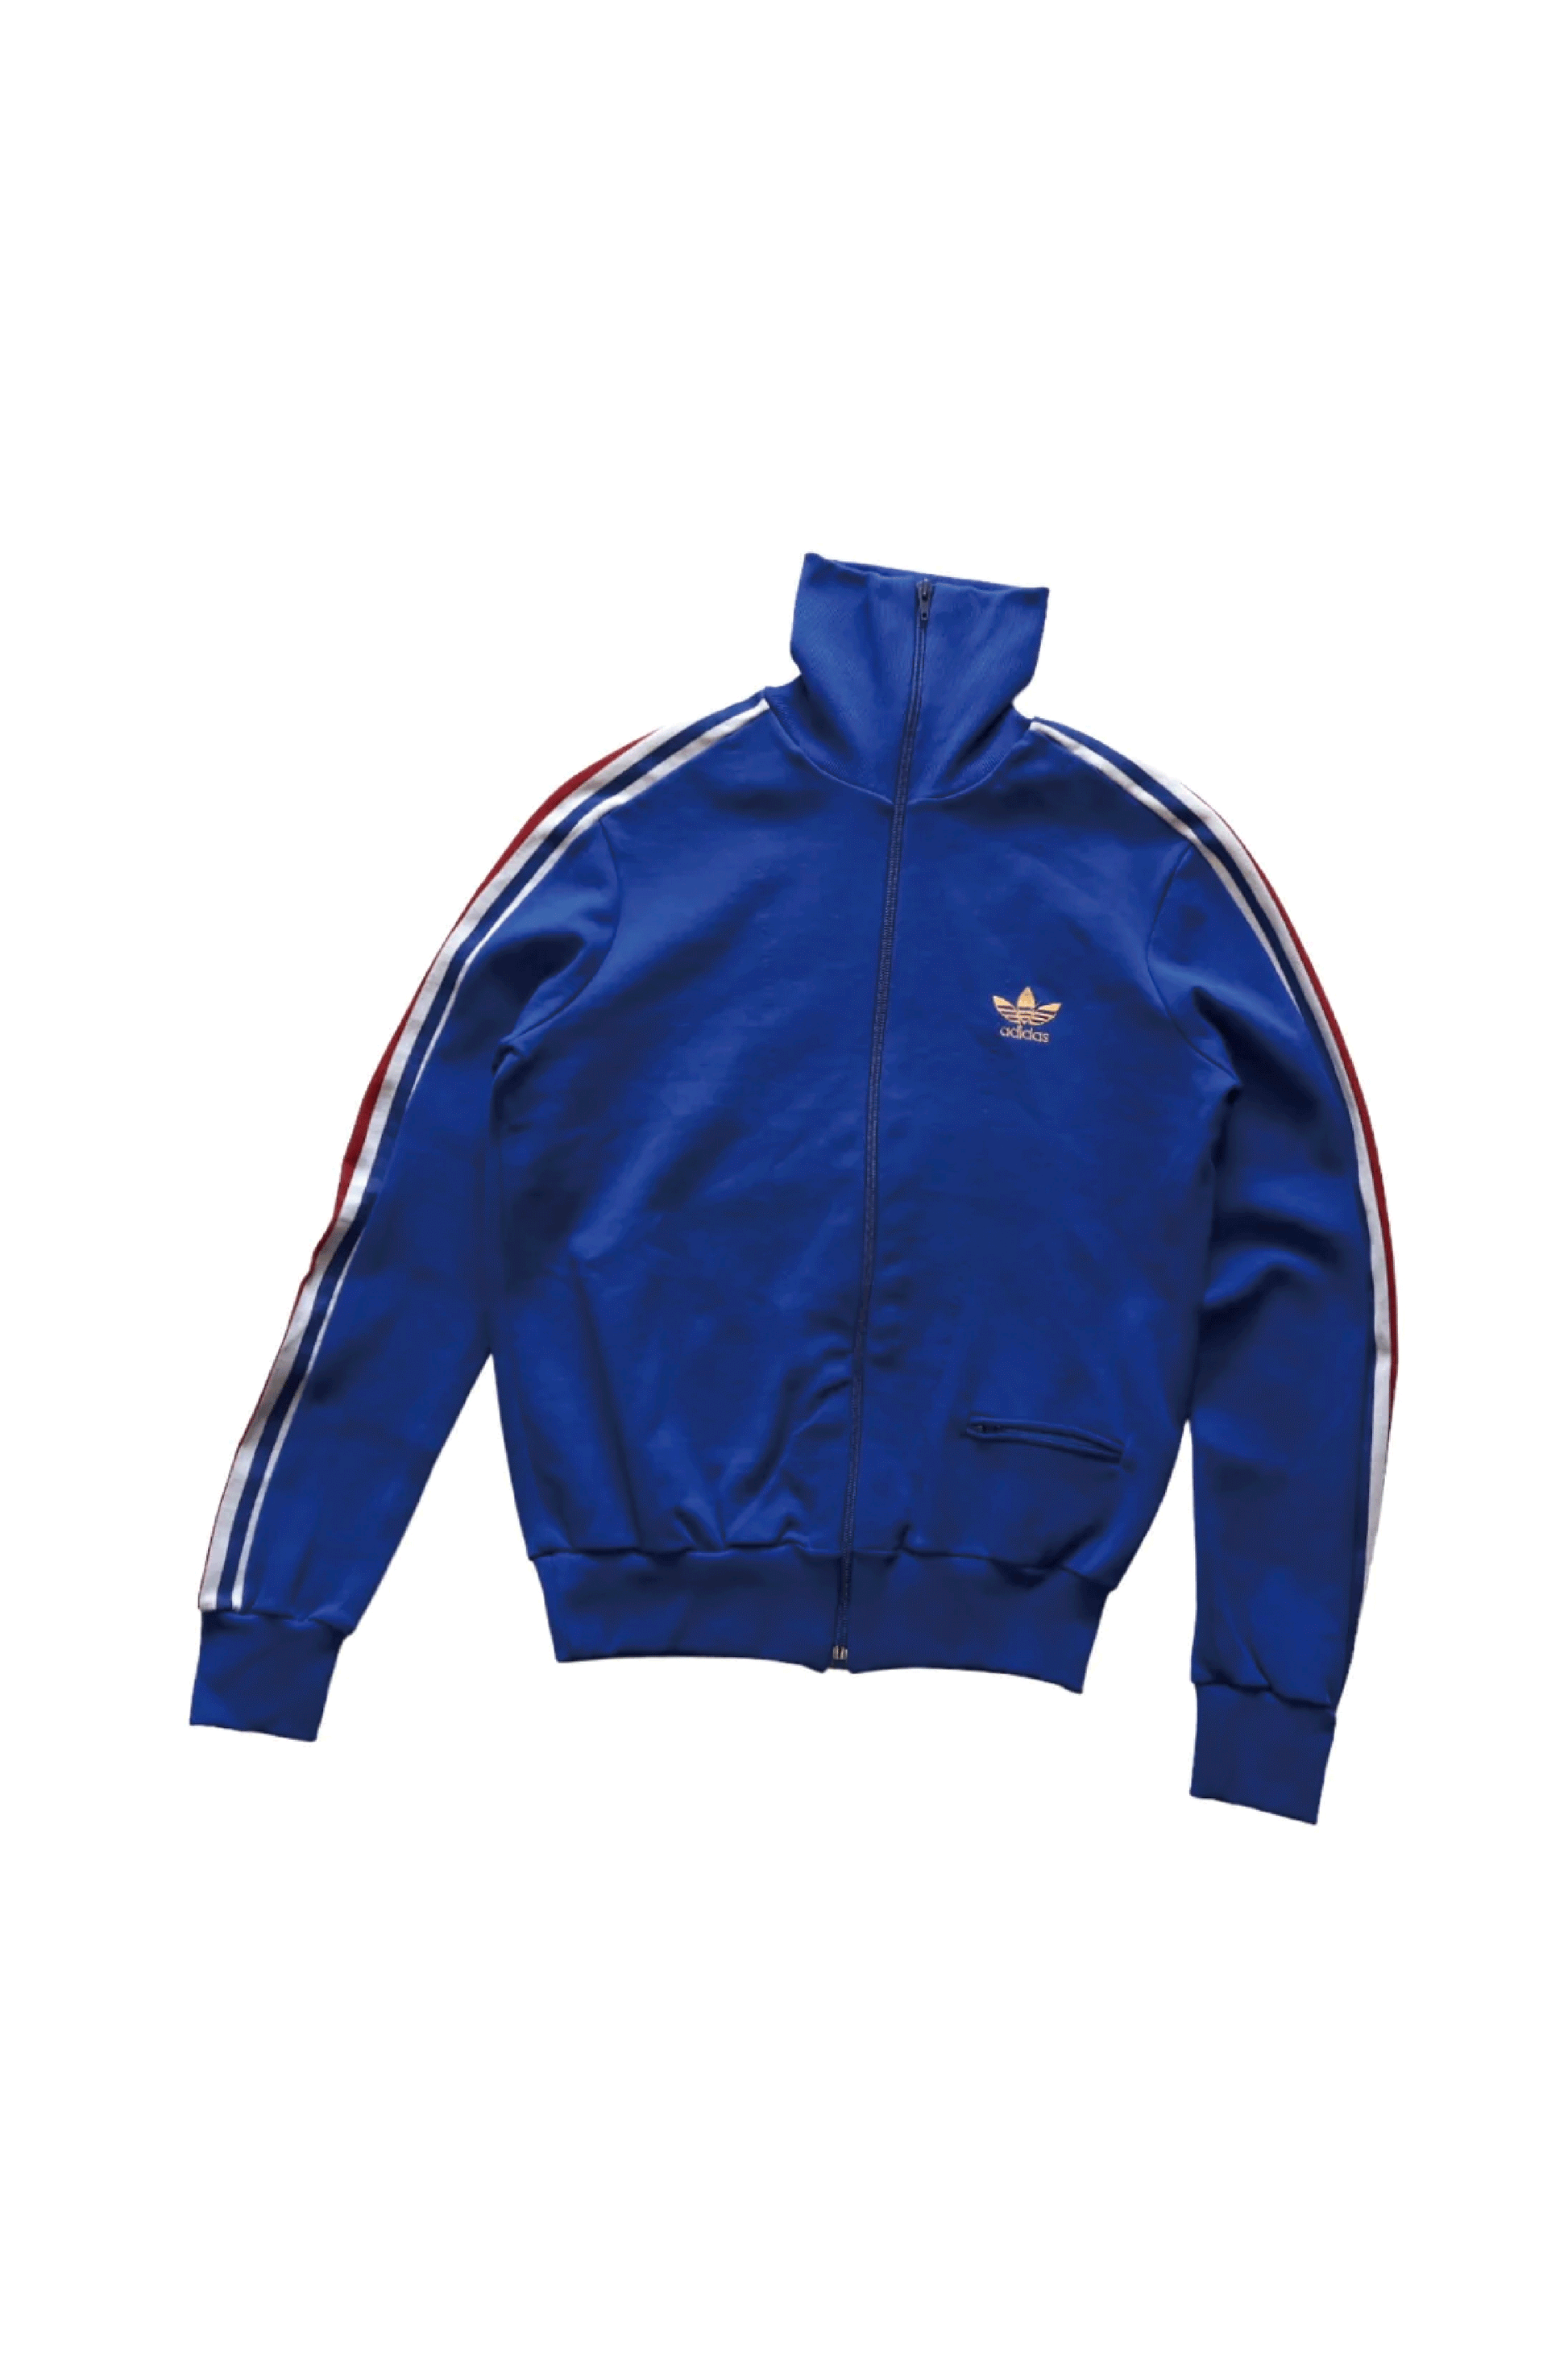 MADE in FRANCE 70s adidas TRACK SUIT品物の発送は即日行います